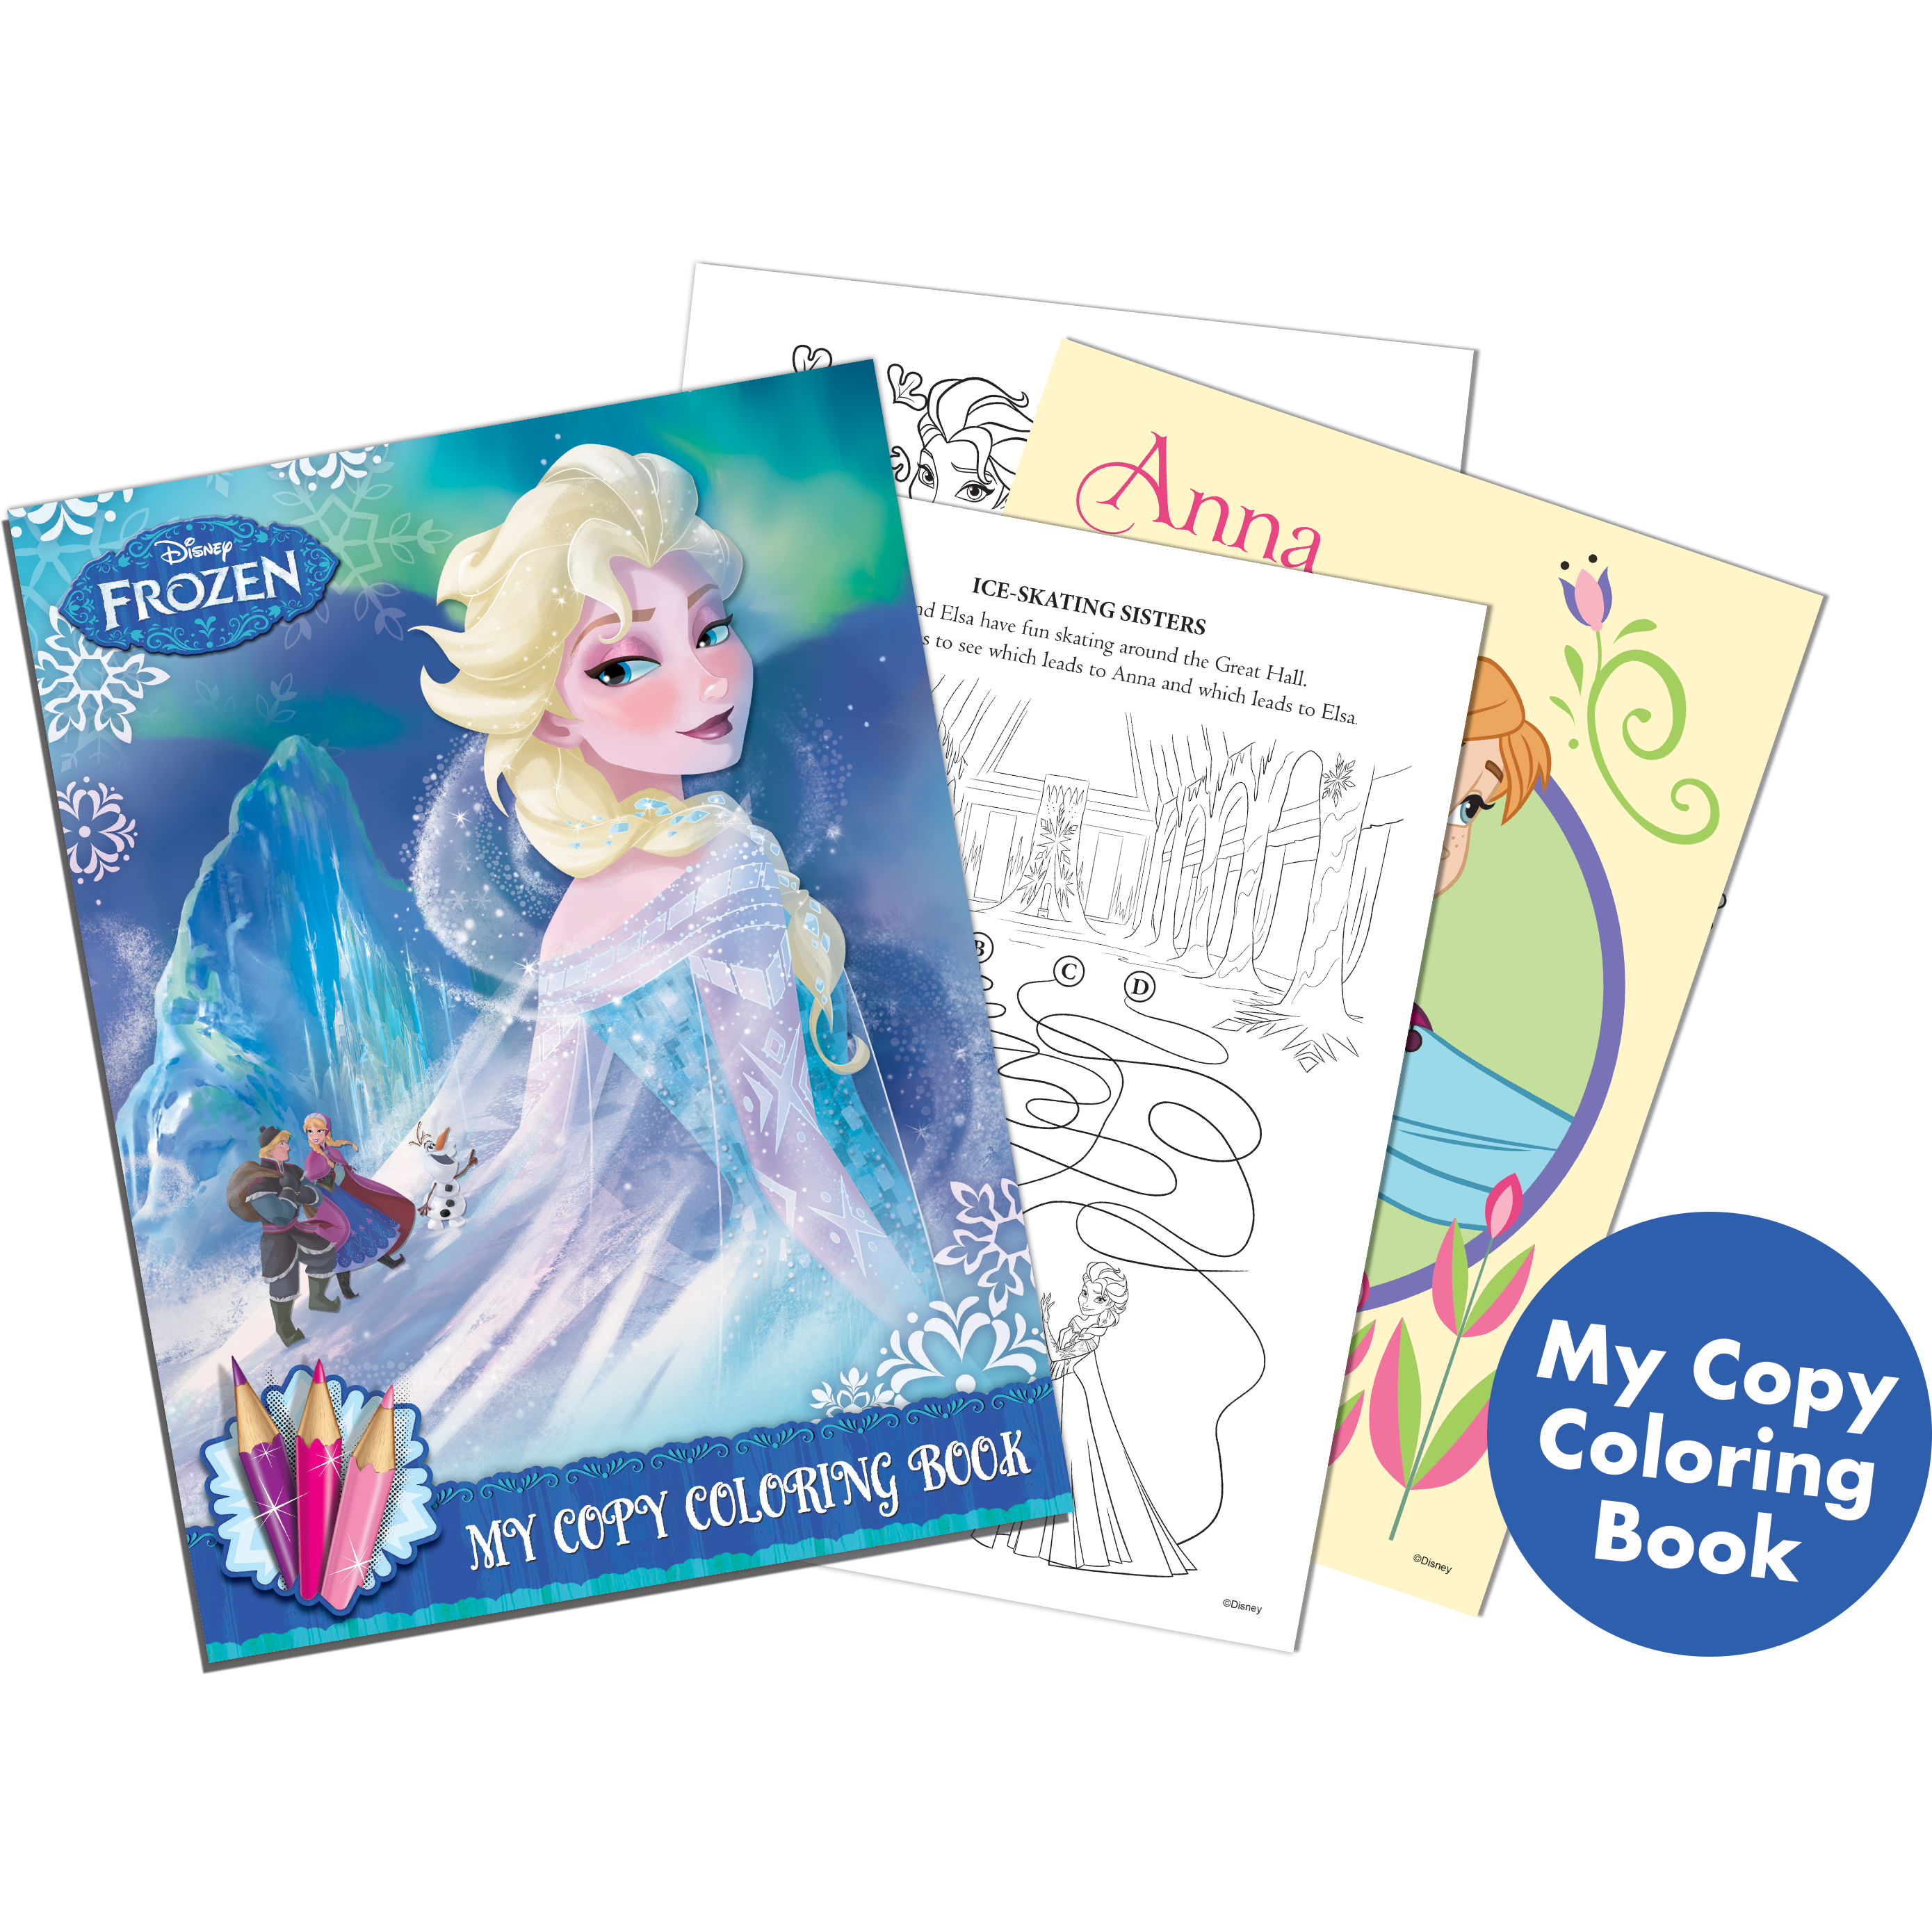 Frozen - Coloring Book A4 - Mod 35-Age 3 Years & Above - Peekaboo